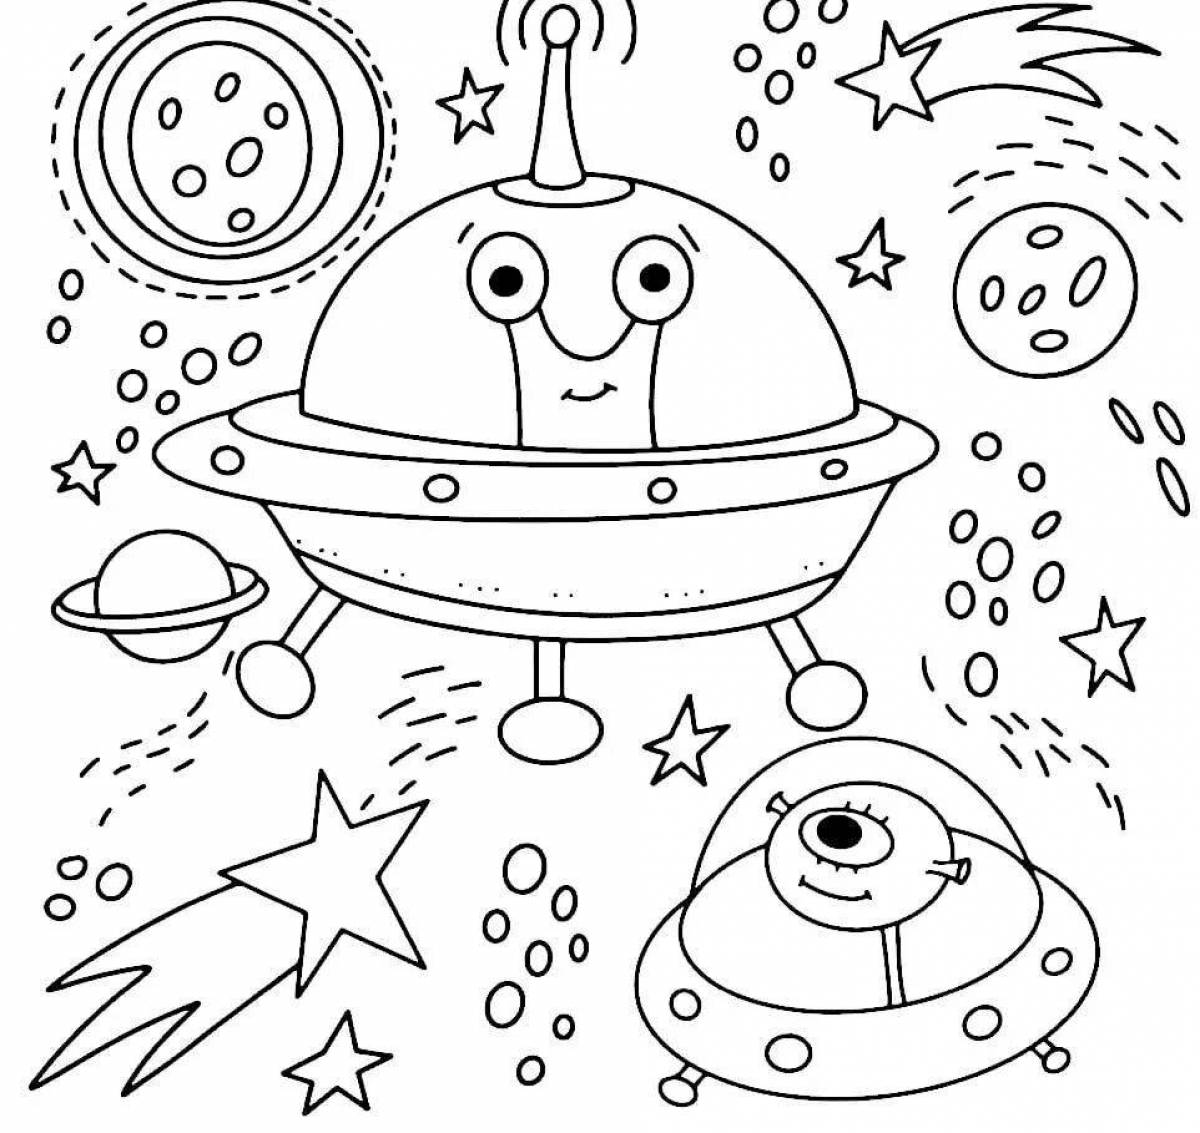 Vibrant space and planets coloring pages for kids